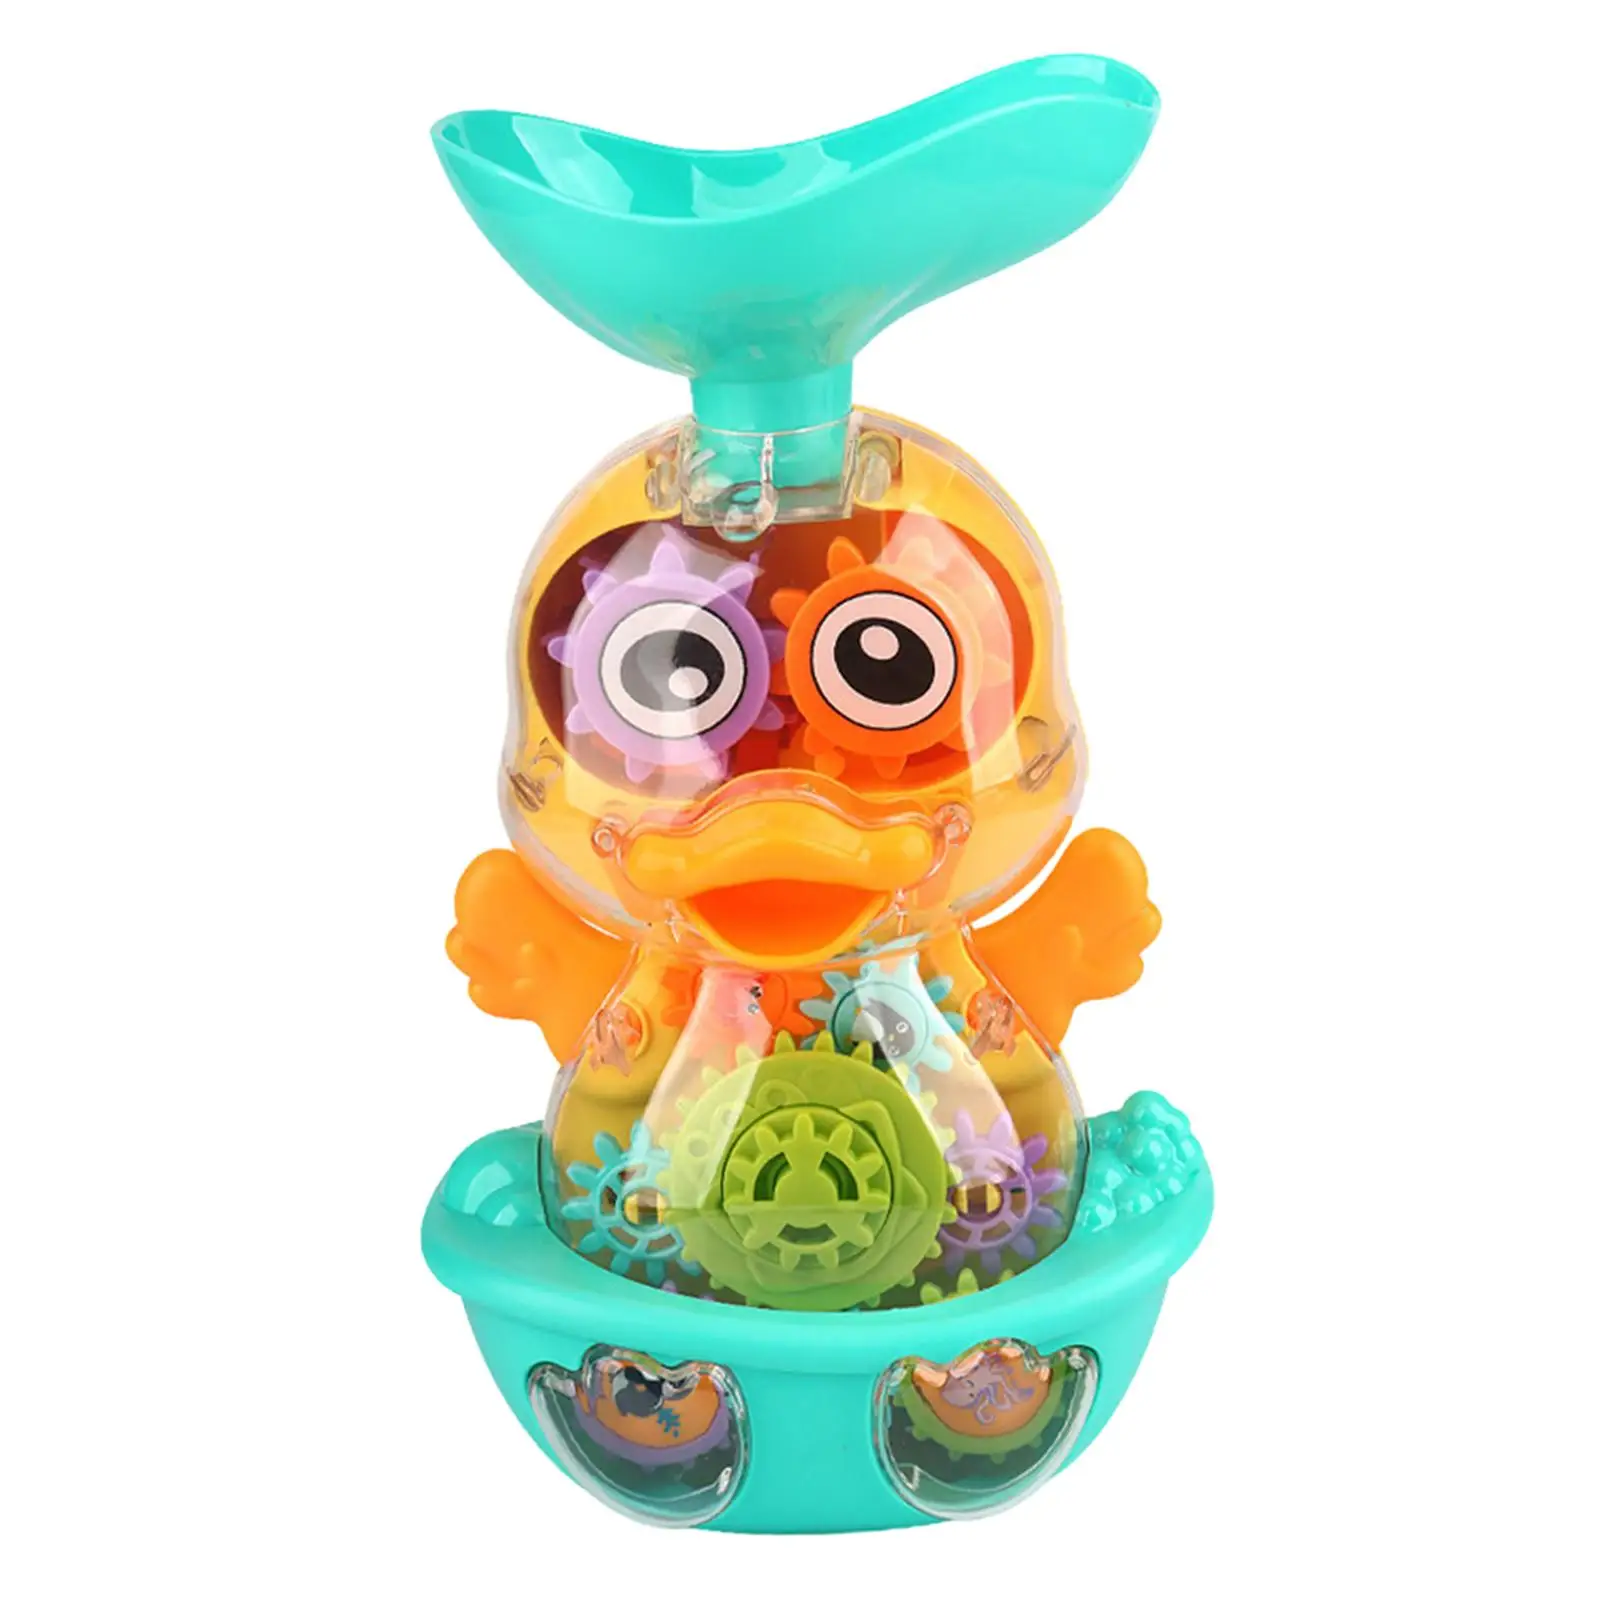 Duck Bath Toys Swimming Bath Toys Floating Pool Games Duck Spray Water Toy for Children Boys Girls Kids Toddlers Holiday Gifts